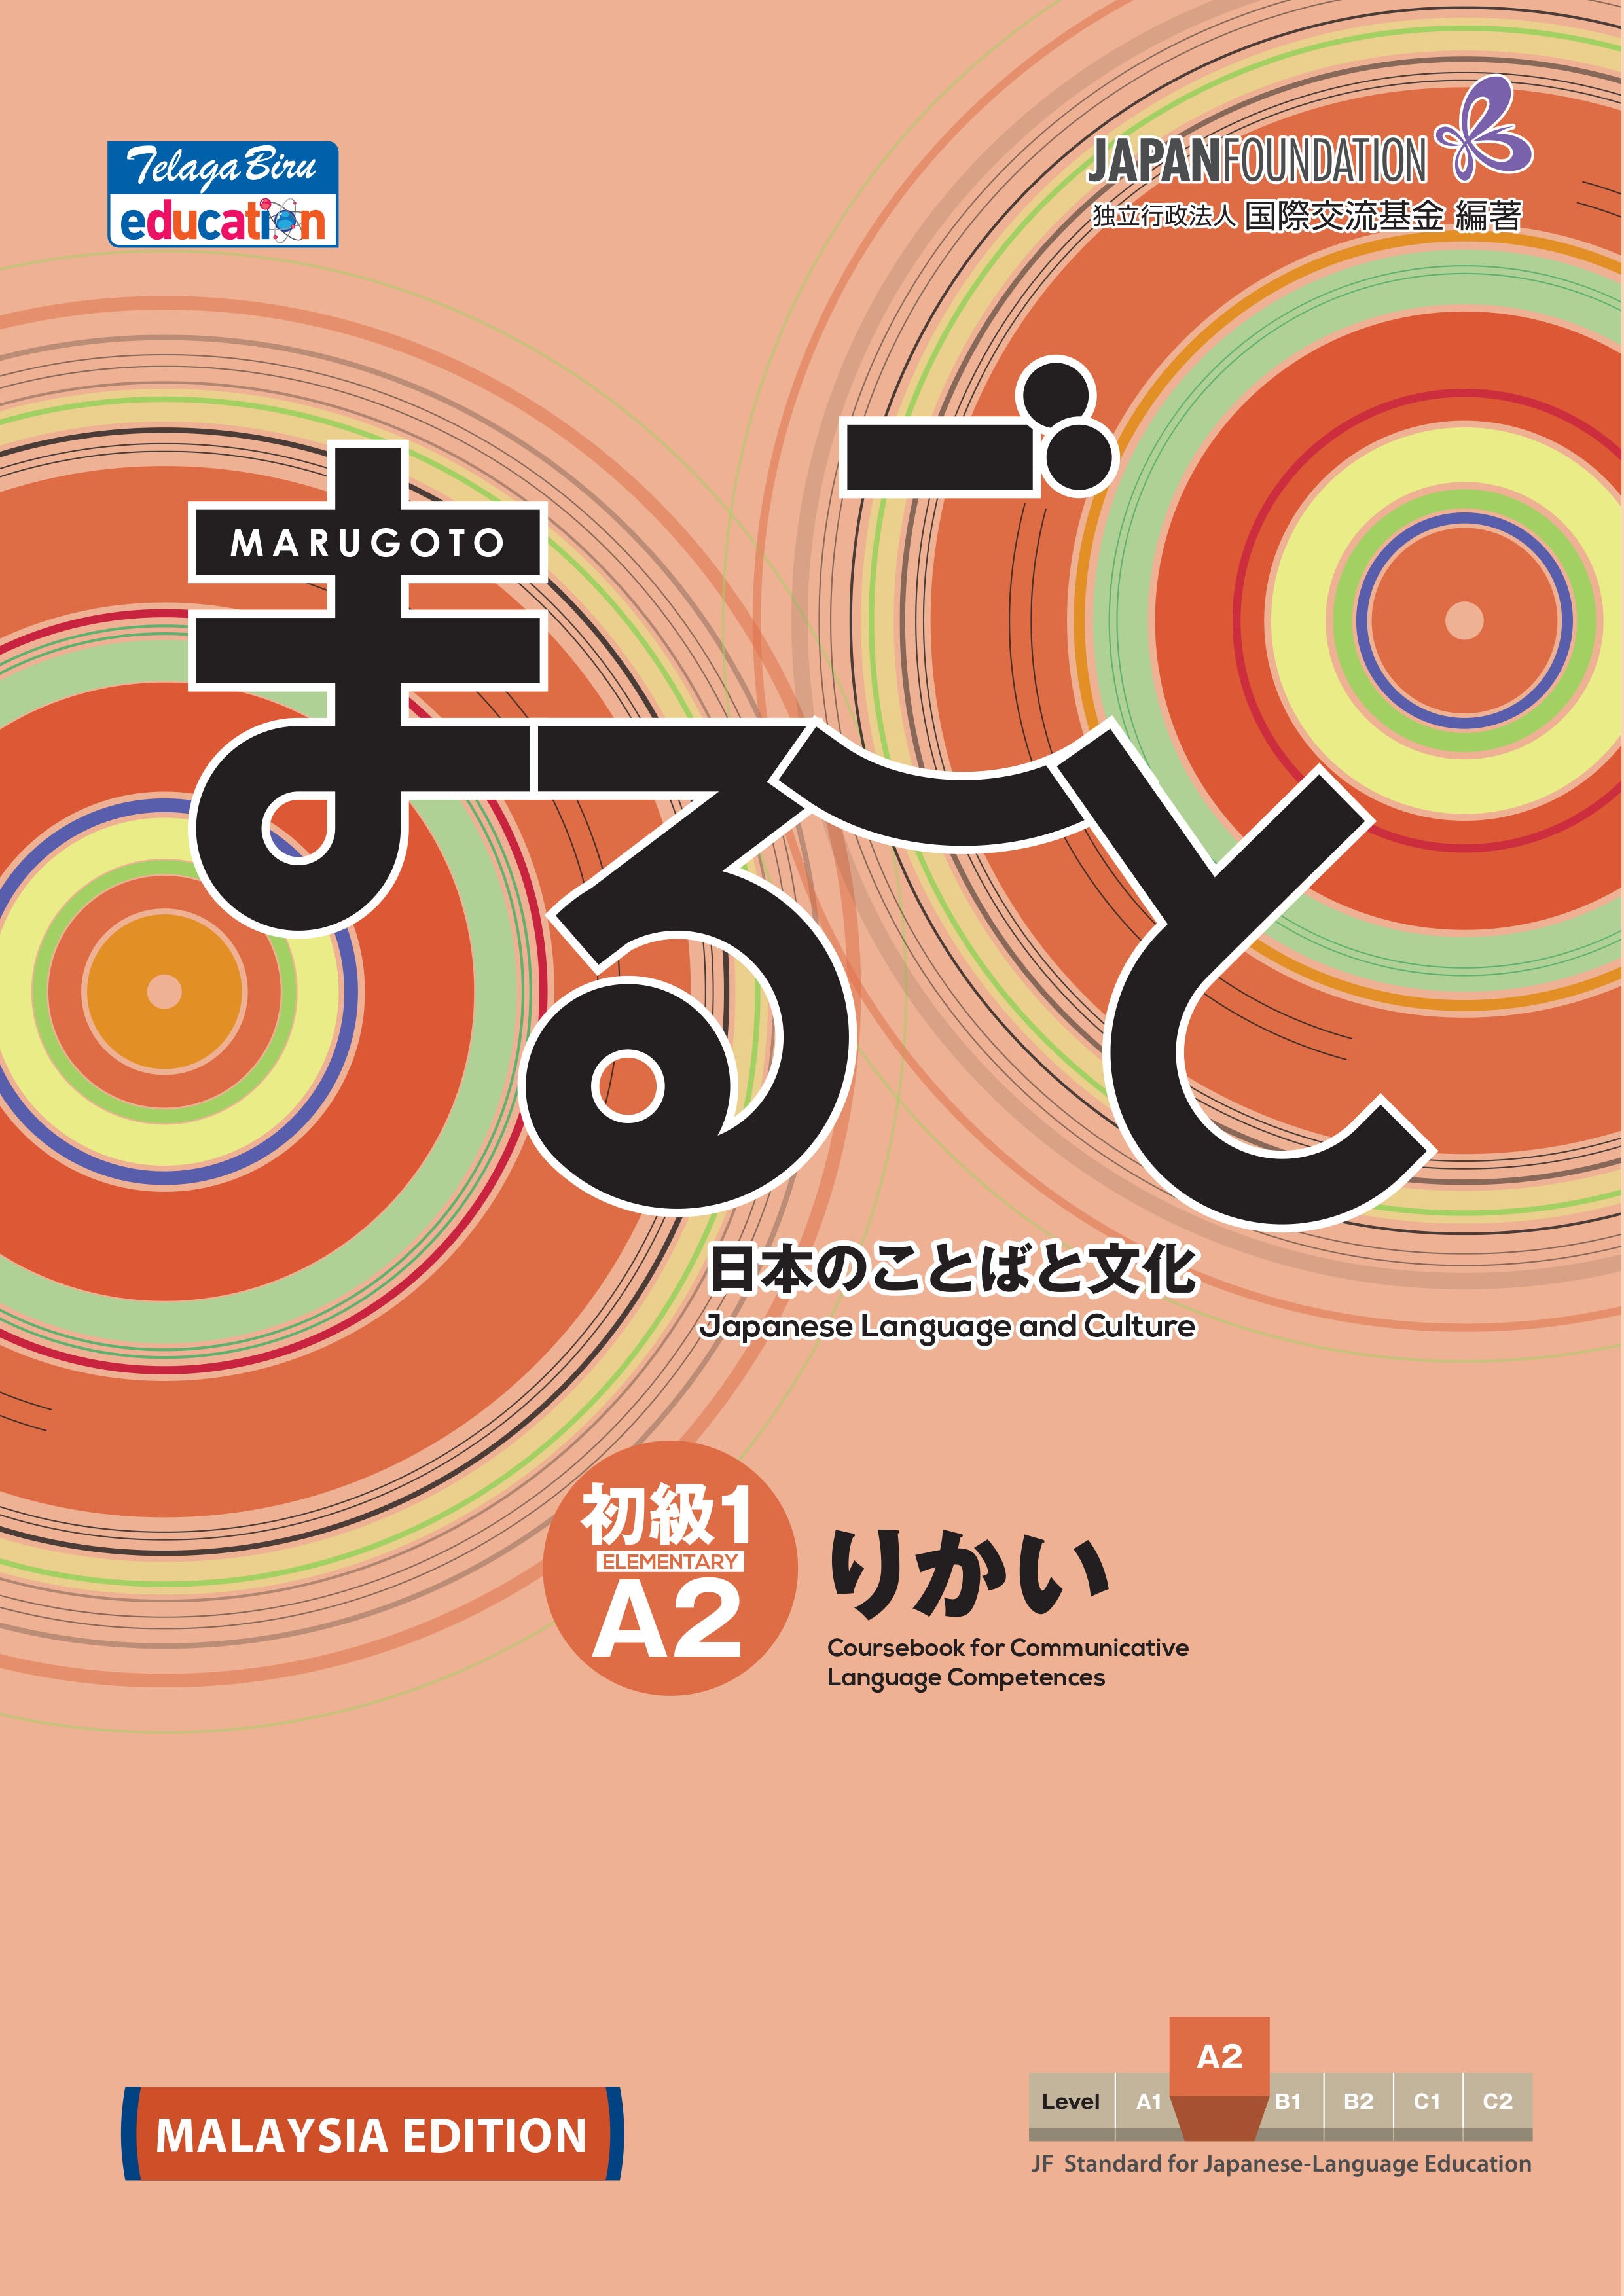 Marugoto: Japanese Language and Culture Elementary A2 Coursebook for Comunnicative Language Competence (Peach) (Rikai) - (TBBS1114)